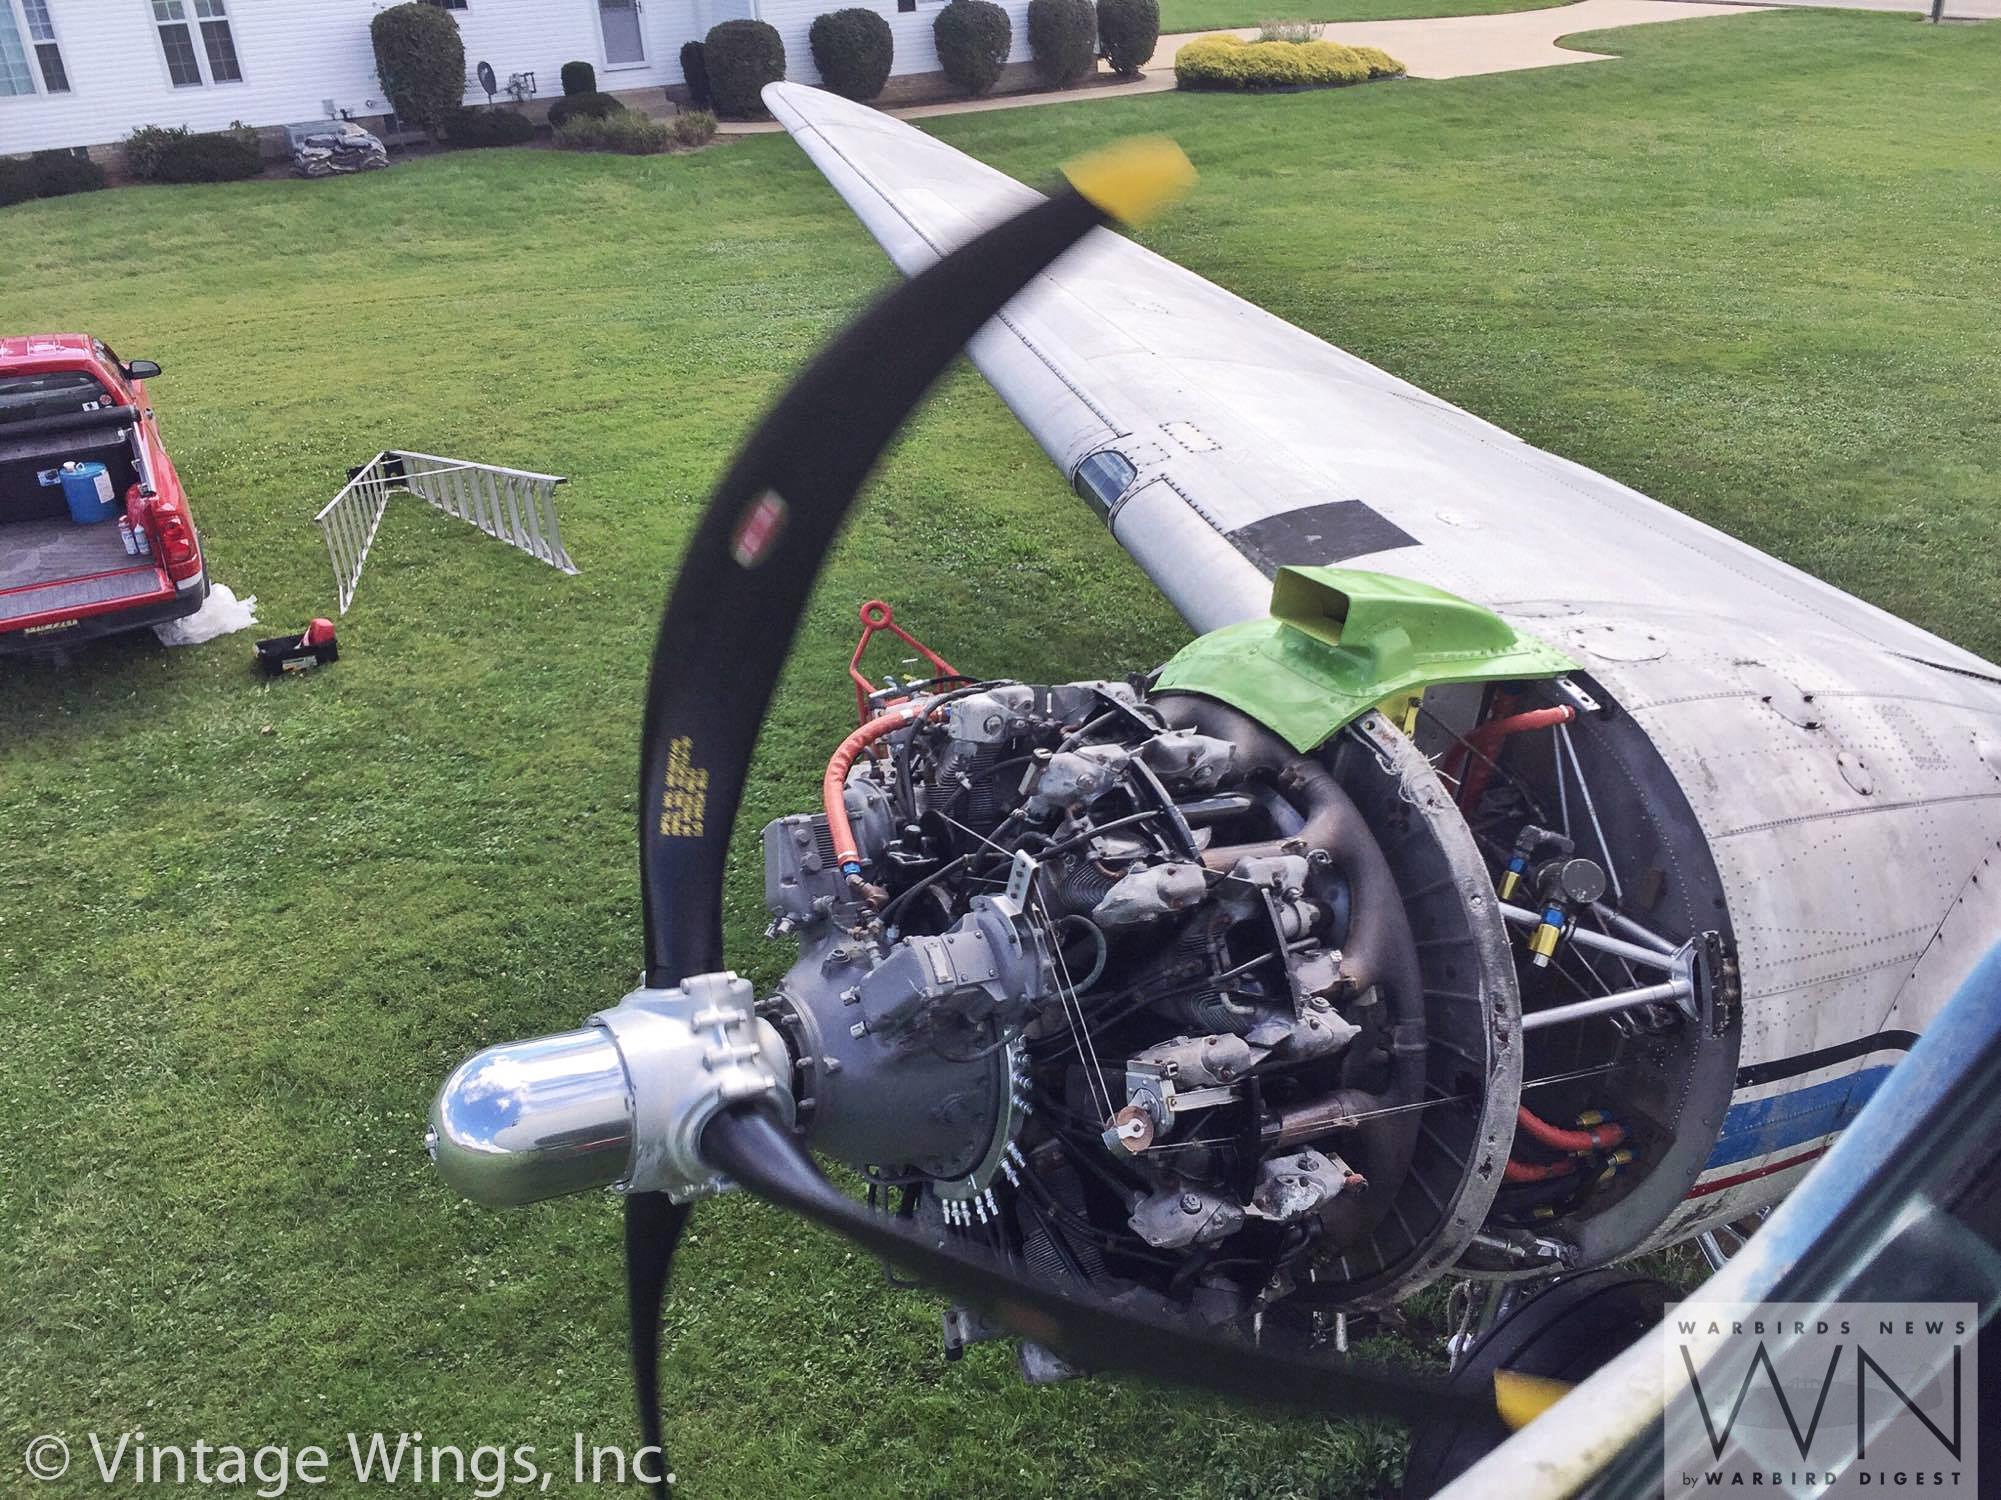 A video still showing the right engine at work! (photo via Vintage Wings, Inc.)